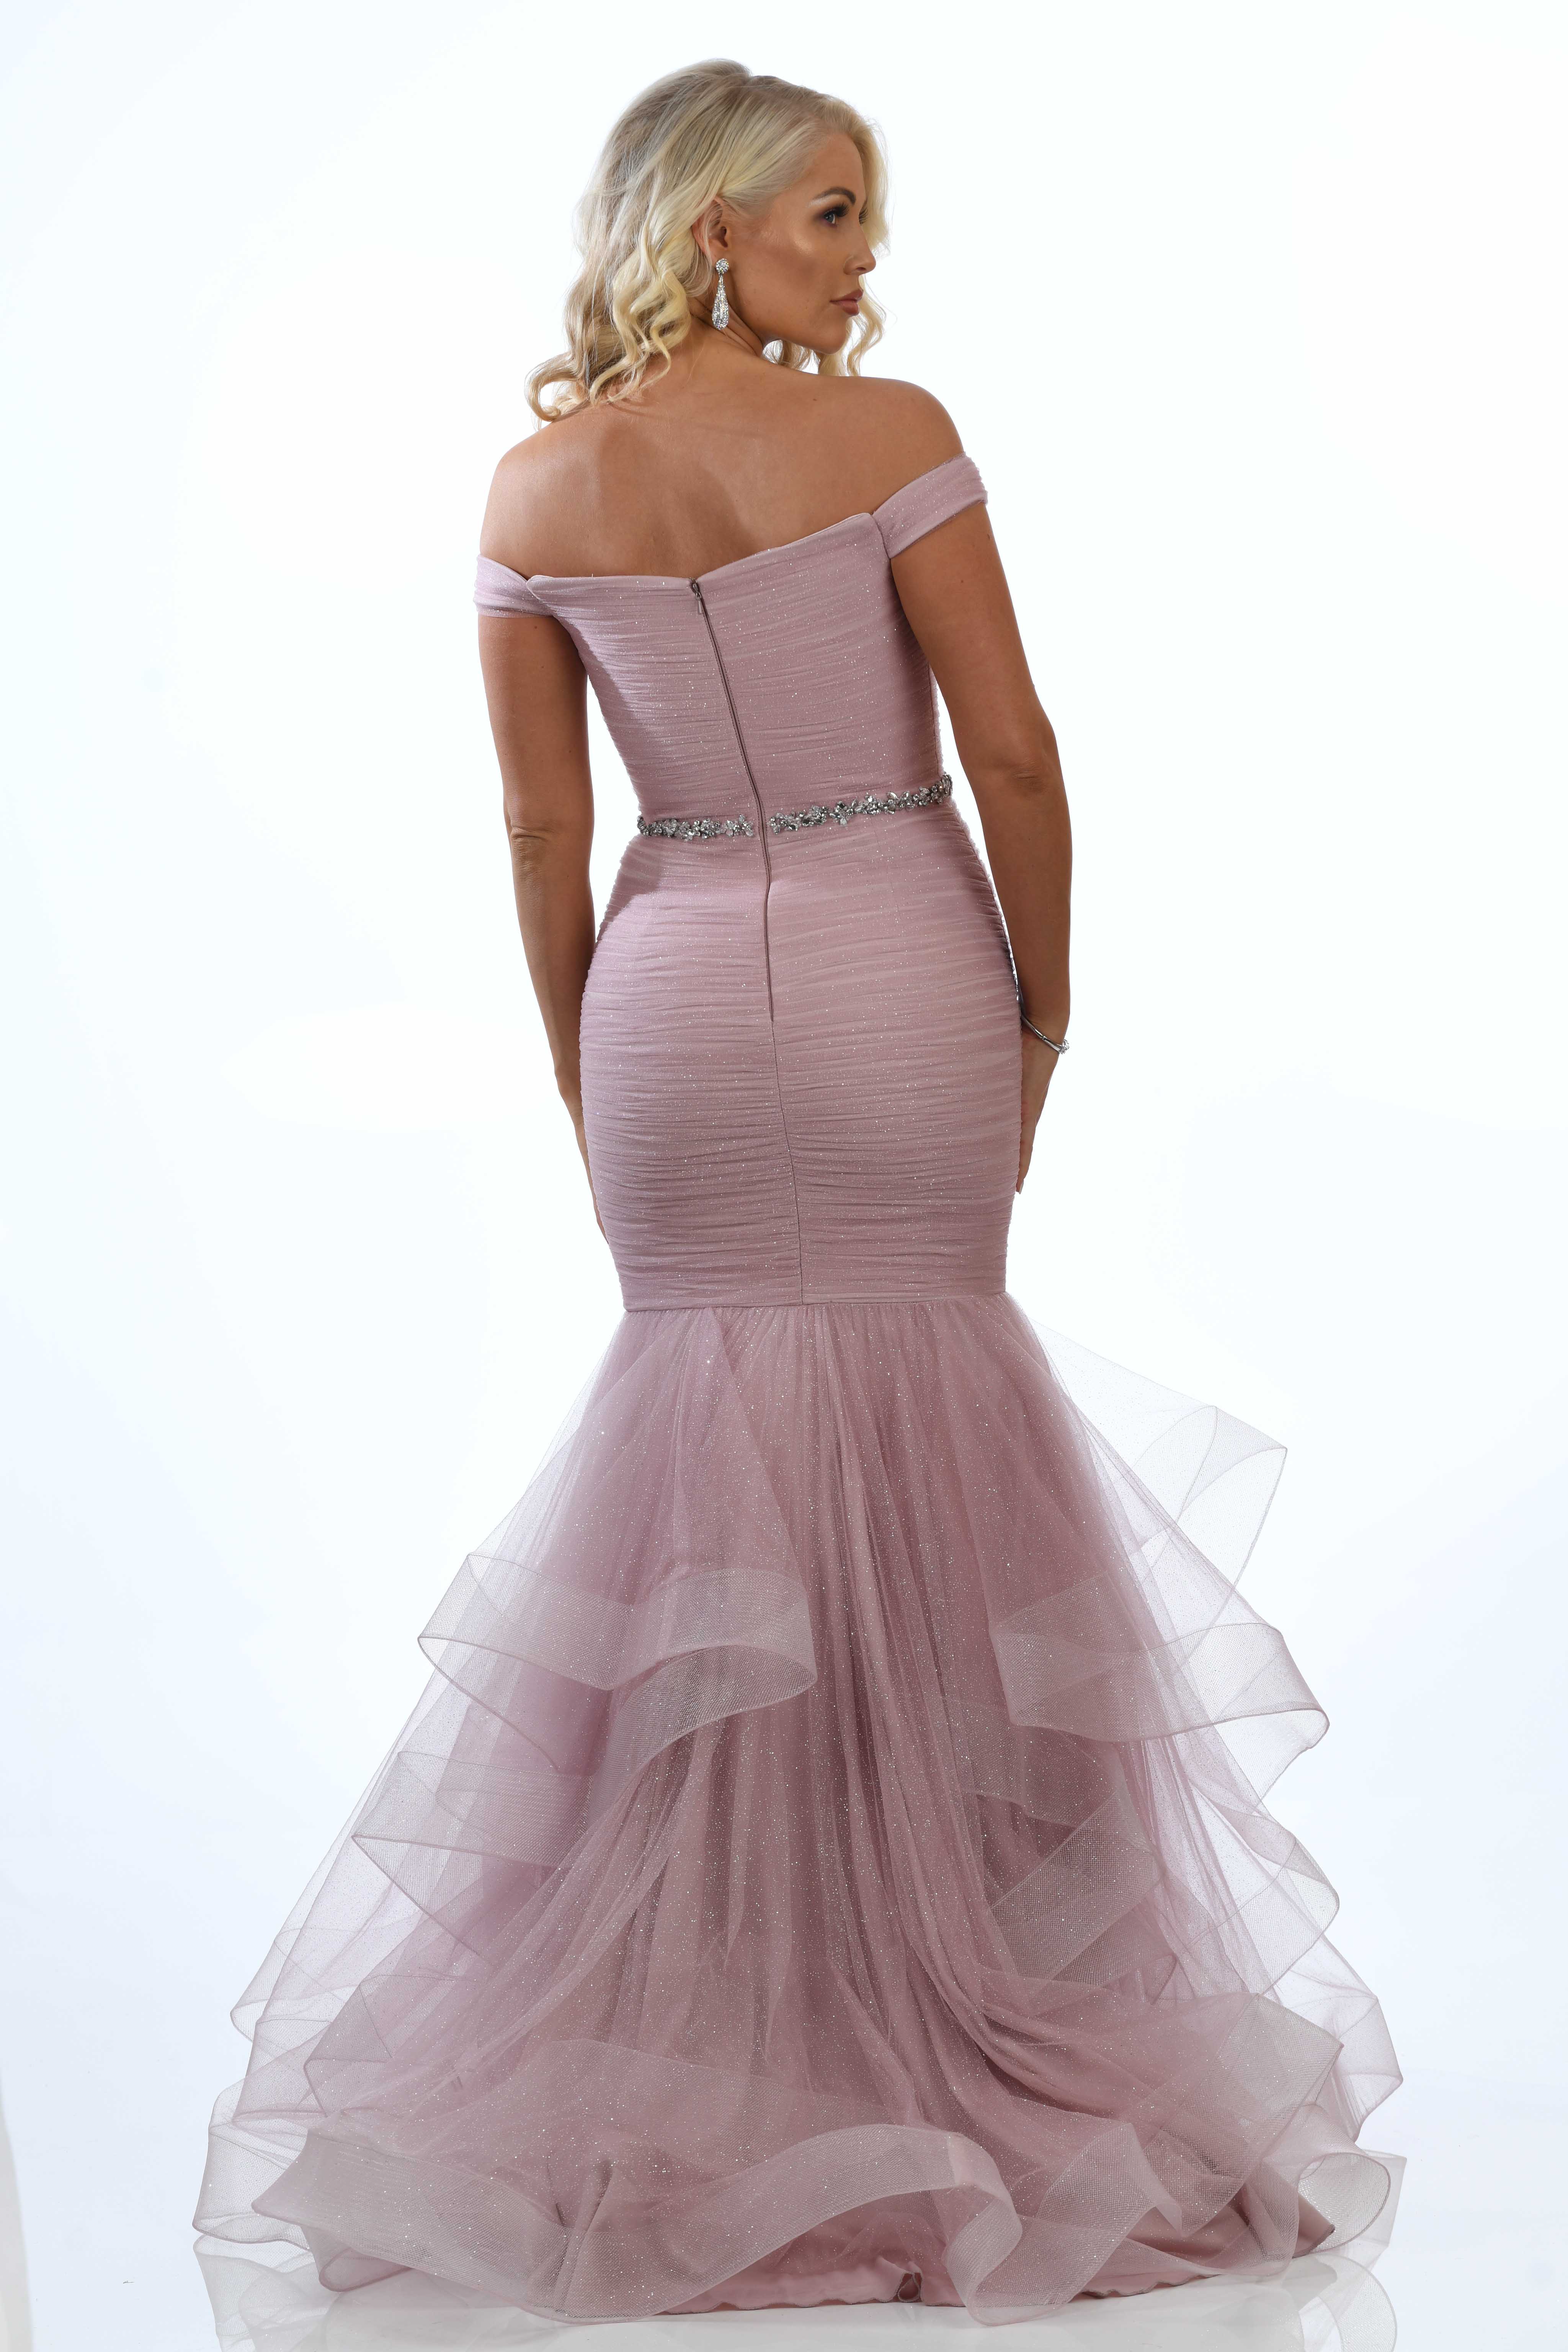 Full length fishtail style dress. AF79531 Catherines of